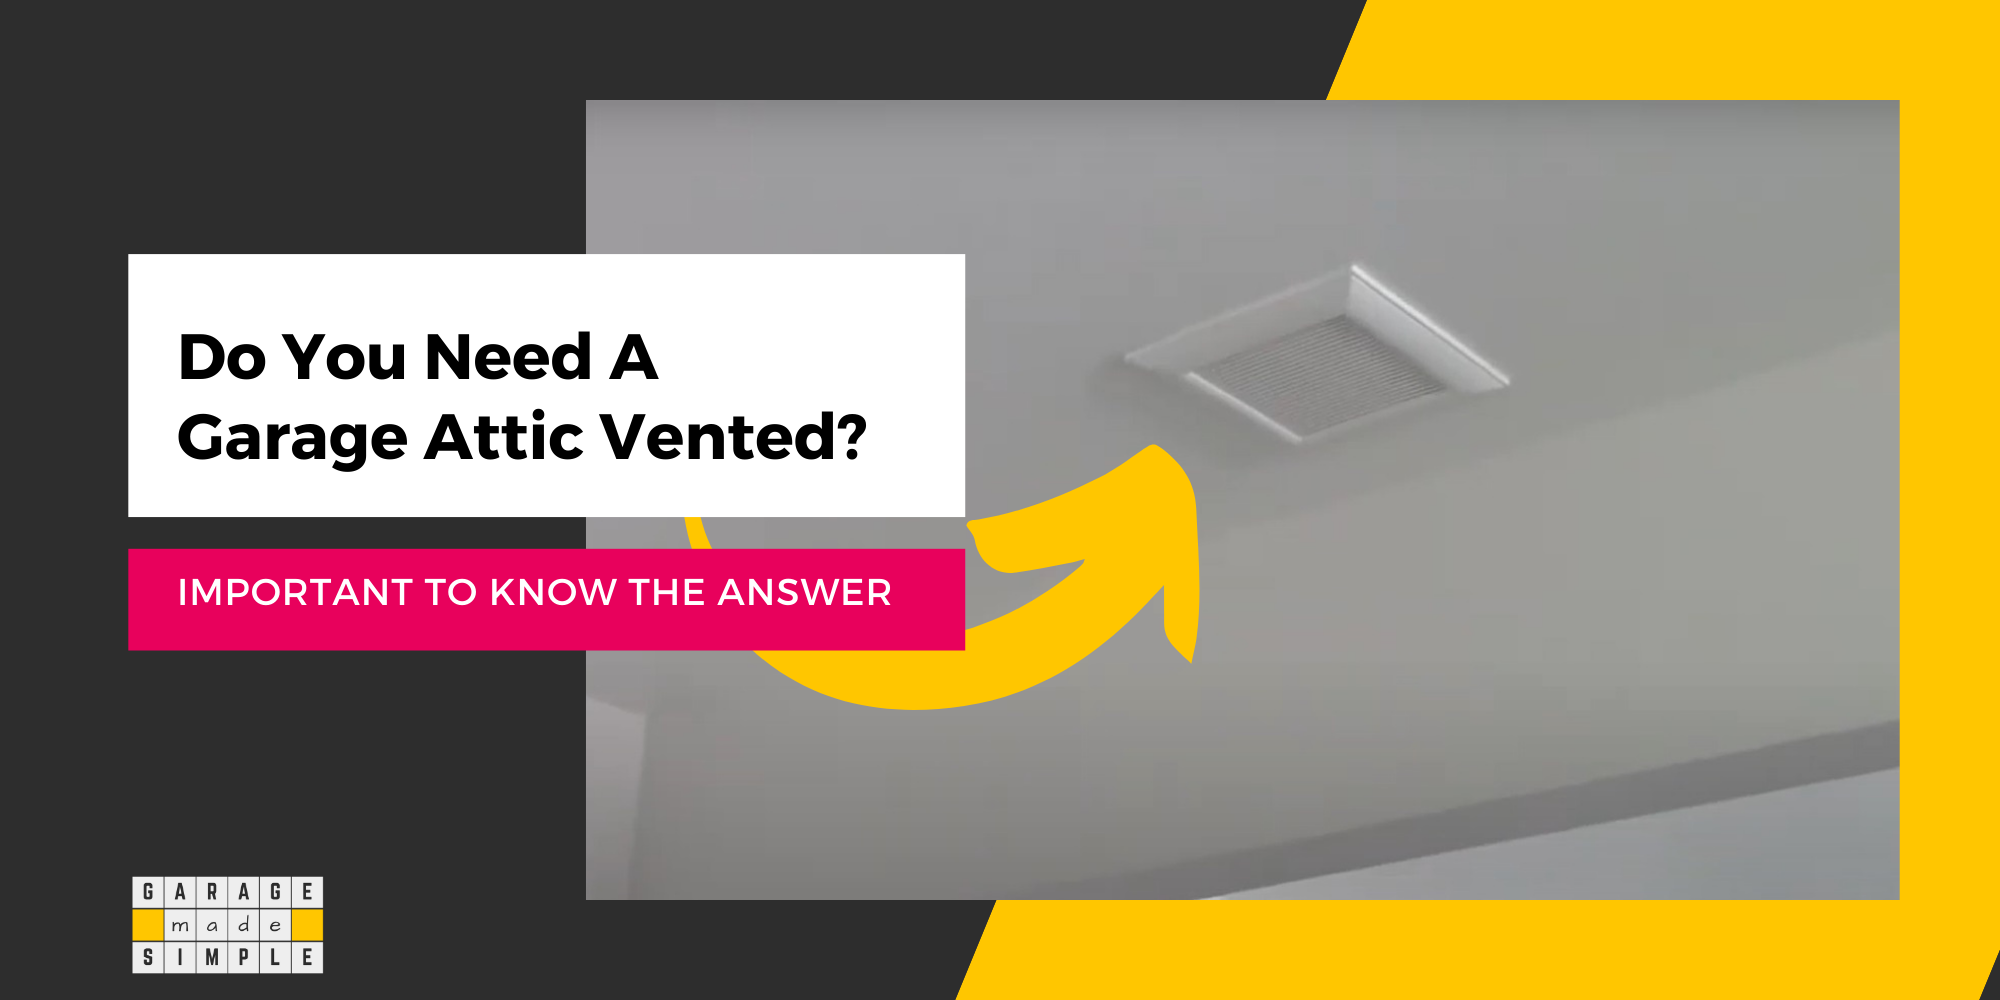 Do You Need To Have Your Garage Attic Vented?